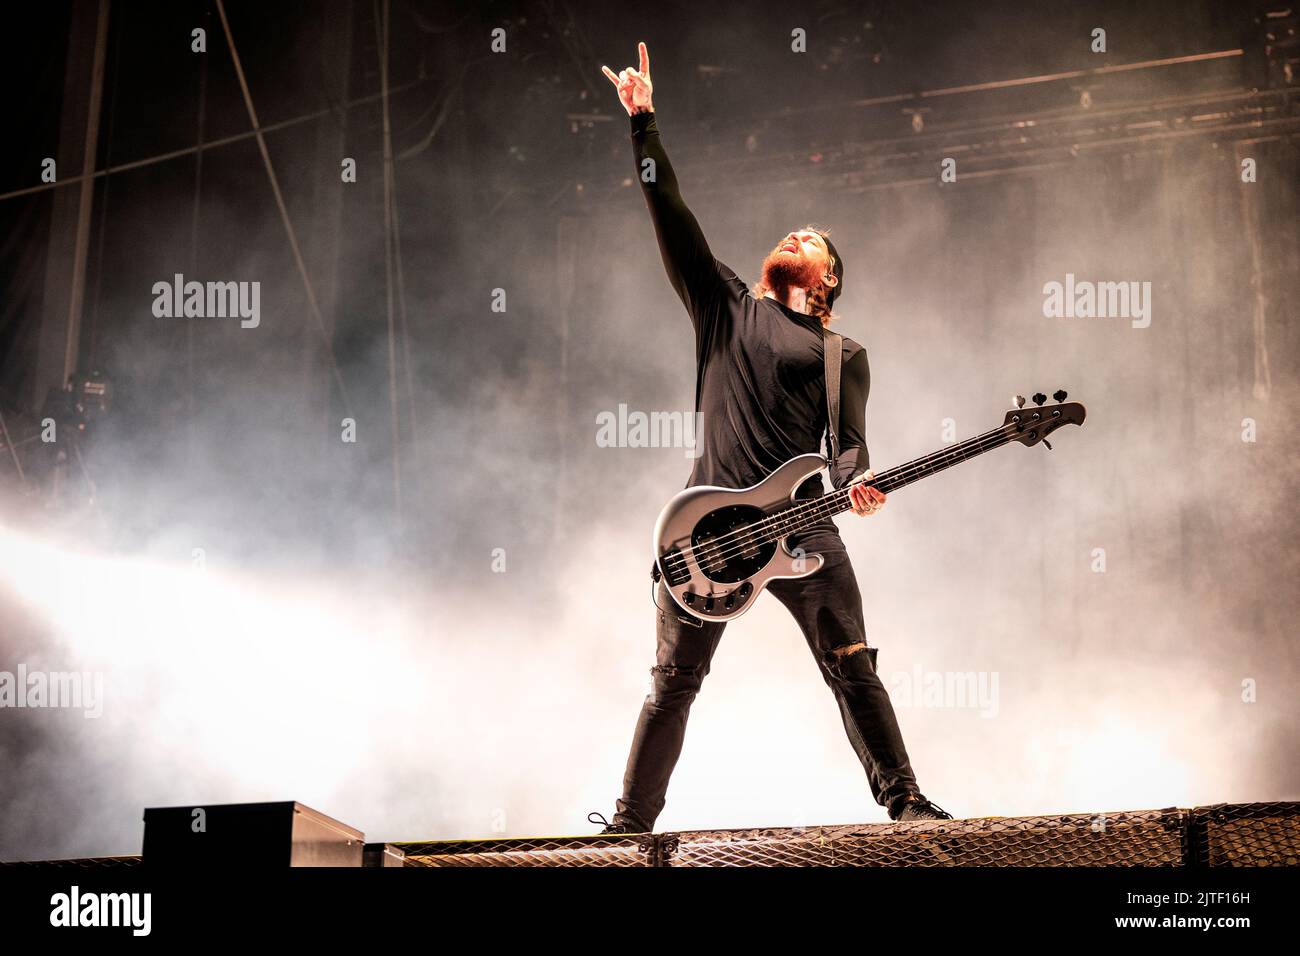 Solvesborg, Sweden. 10th, June 2022. The Swedish heavy metal band In Flames performs a live concert during the Swedish music festival Sweden Rock Festival 2022 in Solvesborg. Here bass player Bryce Paul is seen live on stage. (Photo credit: Gonzales Photo - Terje Dokken). Stock Photo